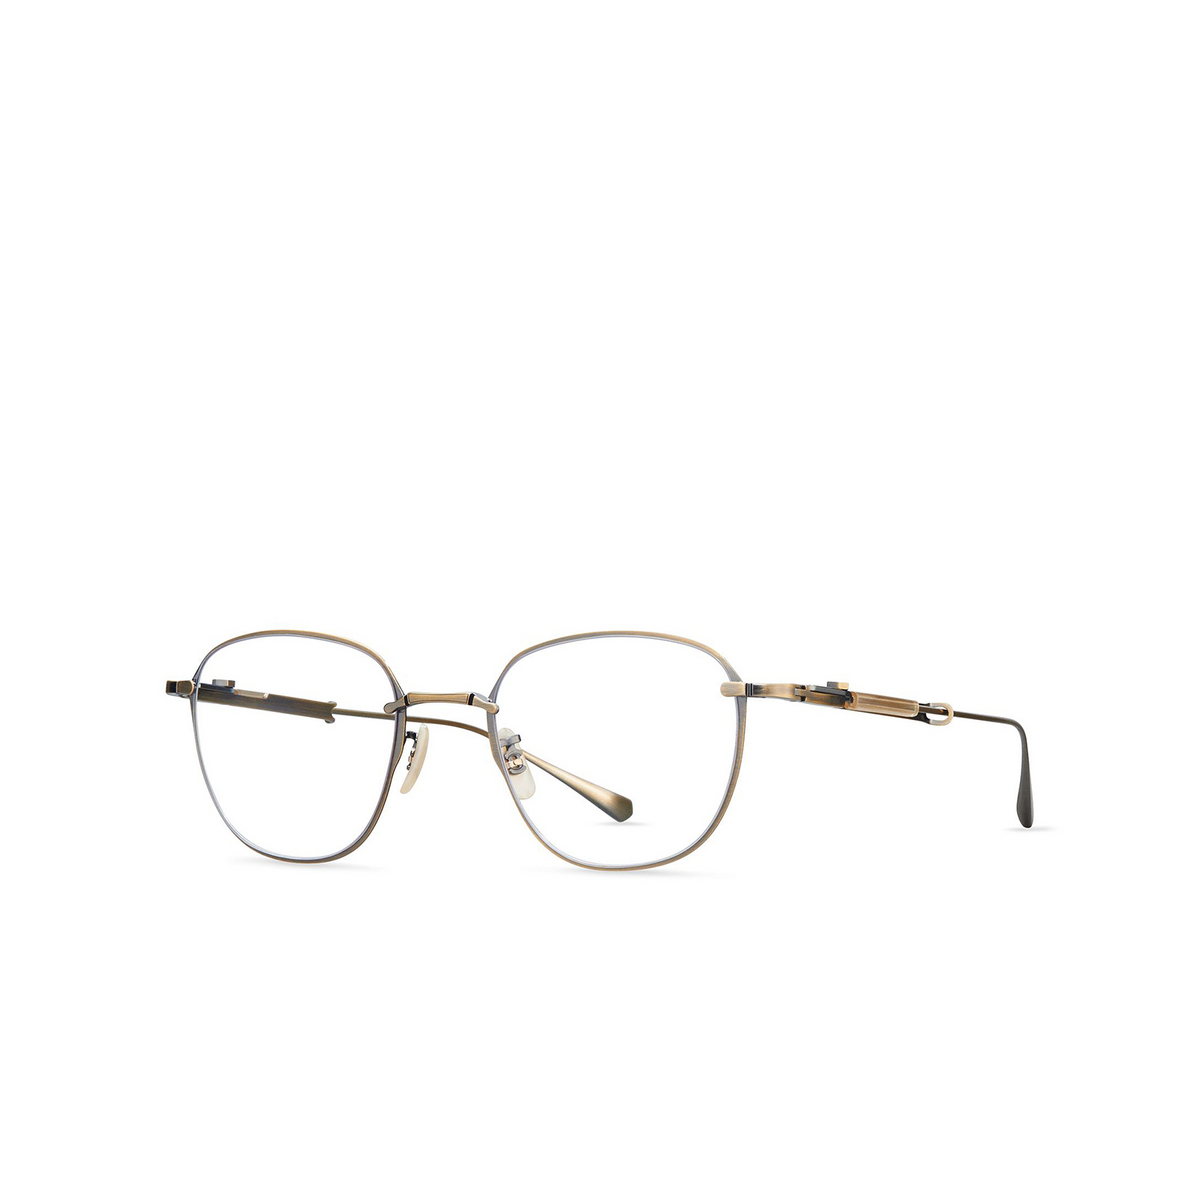 Mr. Leight GRIFFITH CL Eyeglasses ATSG-SMT Antique Silver Gold-Summit - three-quarters view